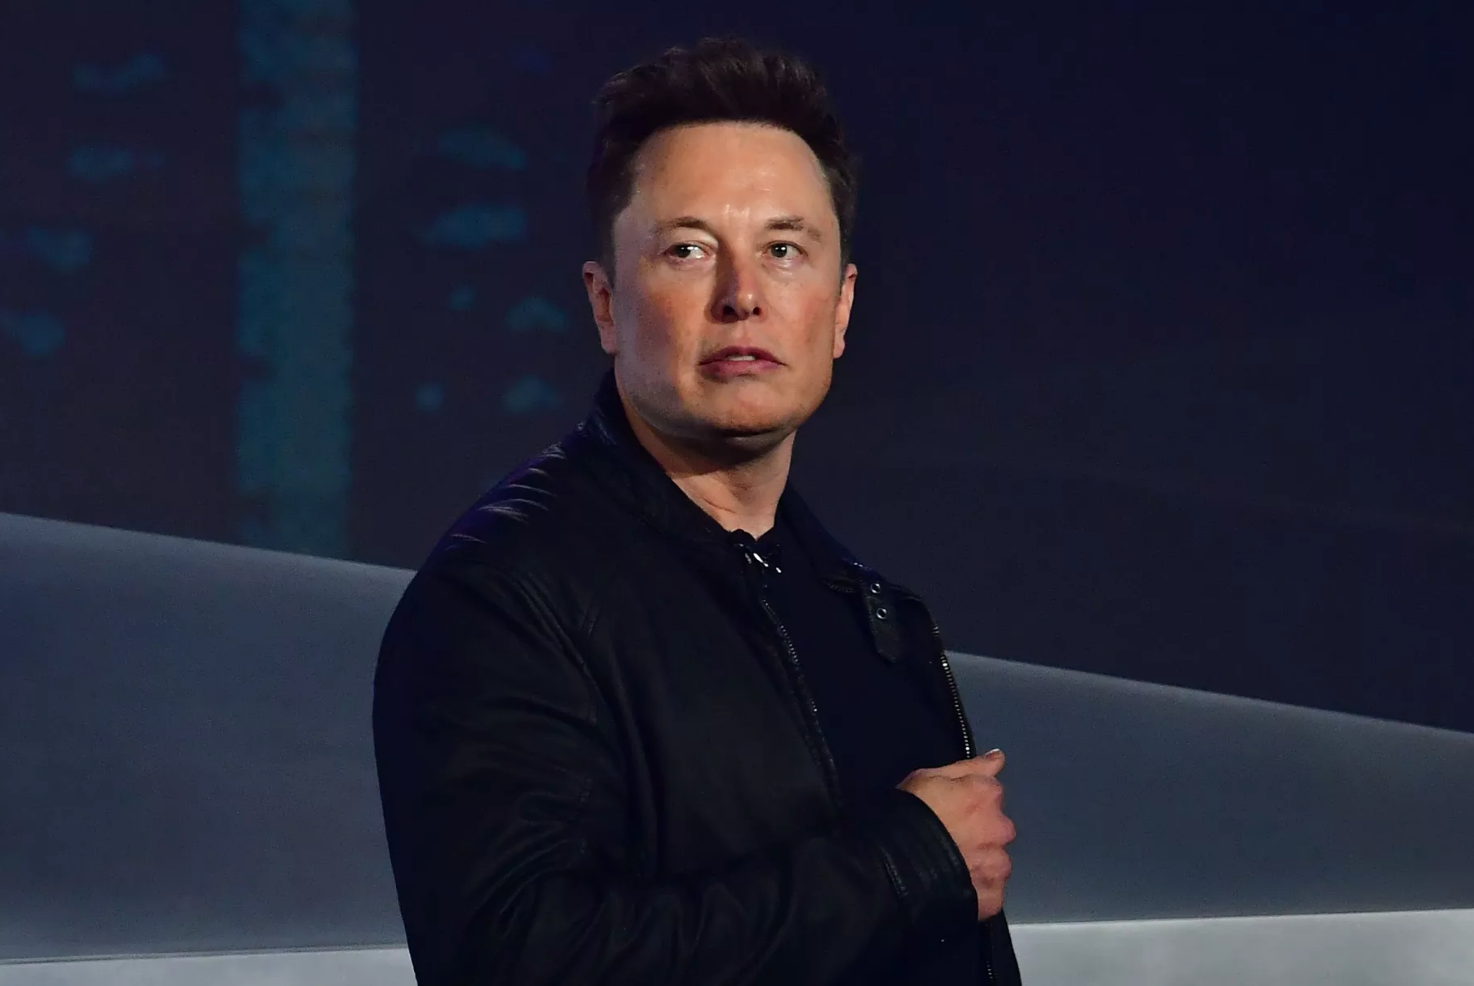 Elon Musk says shelter-in-place orders during COVID-19 are ‘fascist’